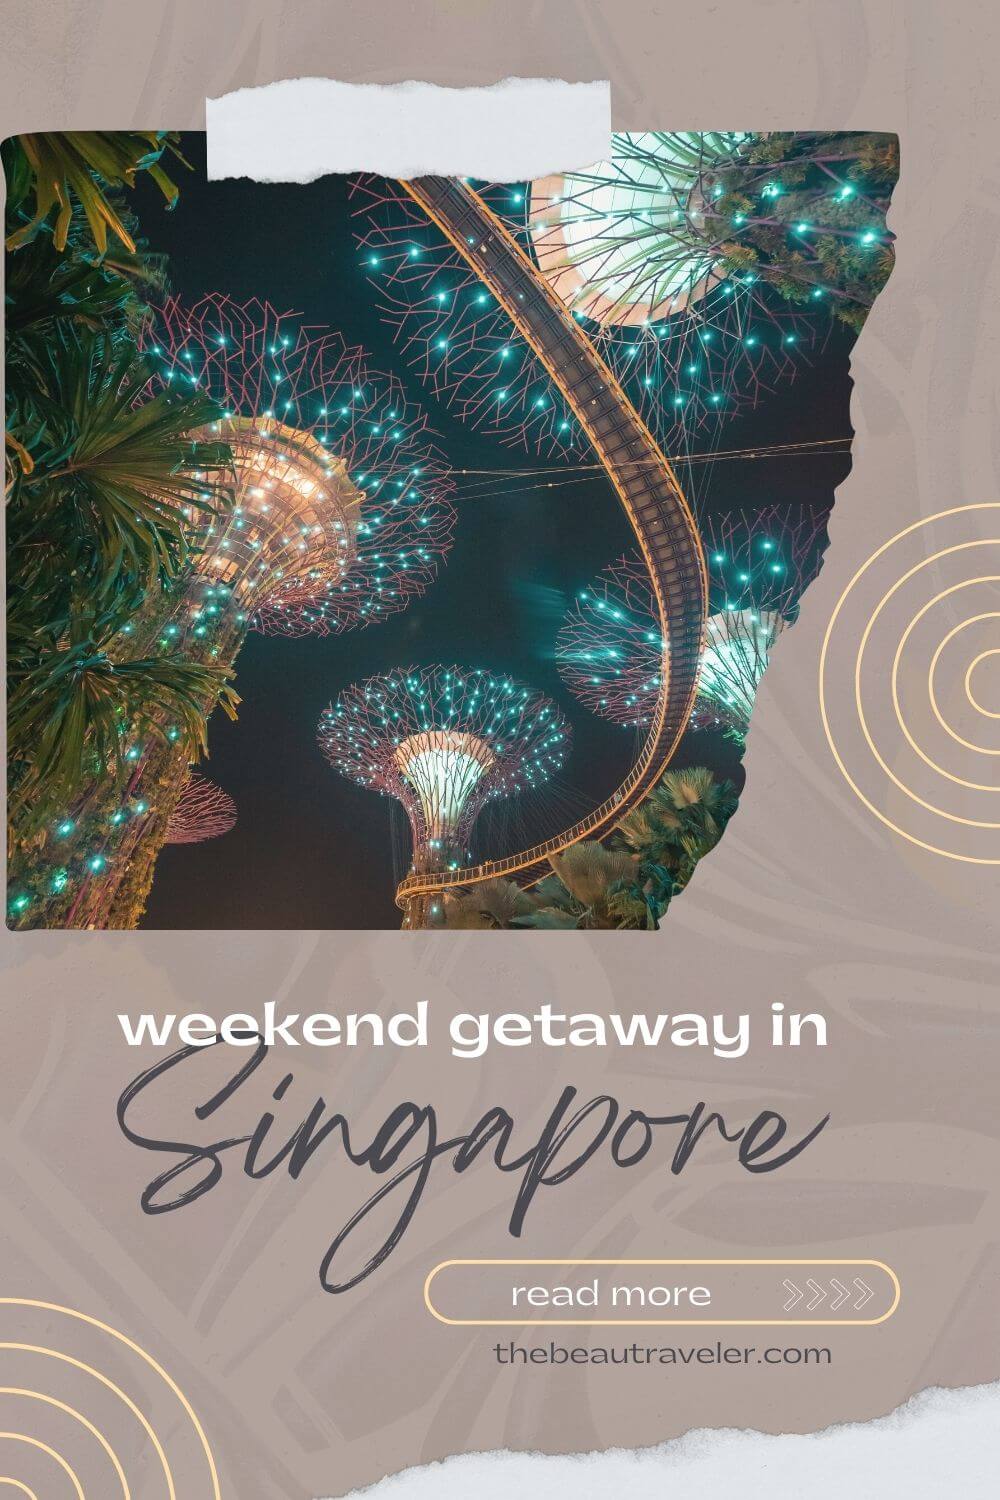 Things to Do in Singapore This Weekend - The BeauTraveler